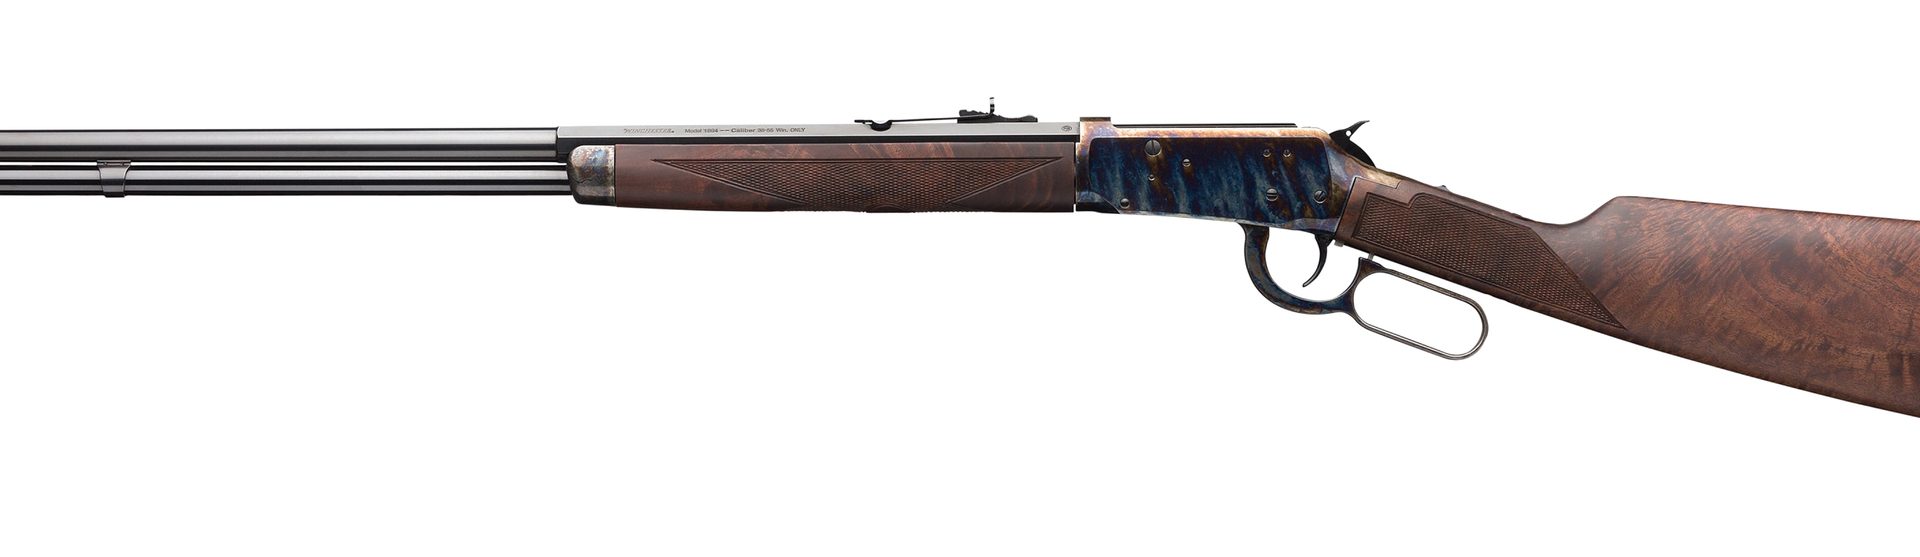 MODEL 94 DELUXE SPORTING RIFLE 2